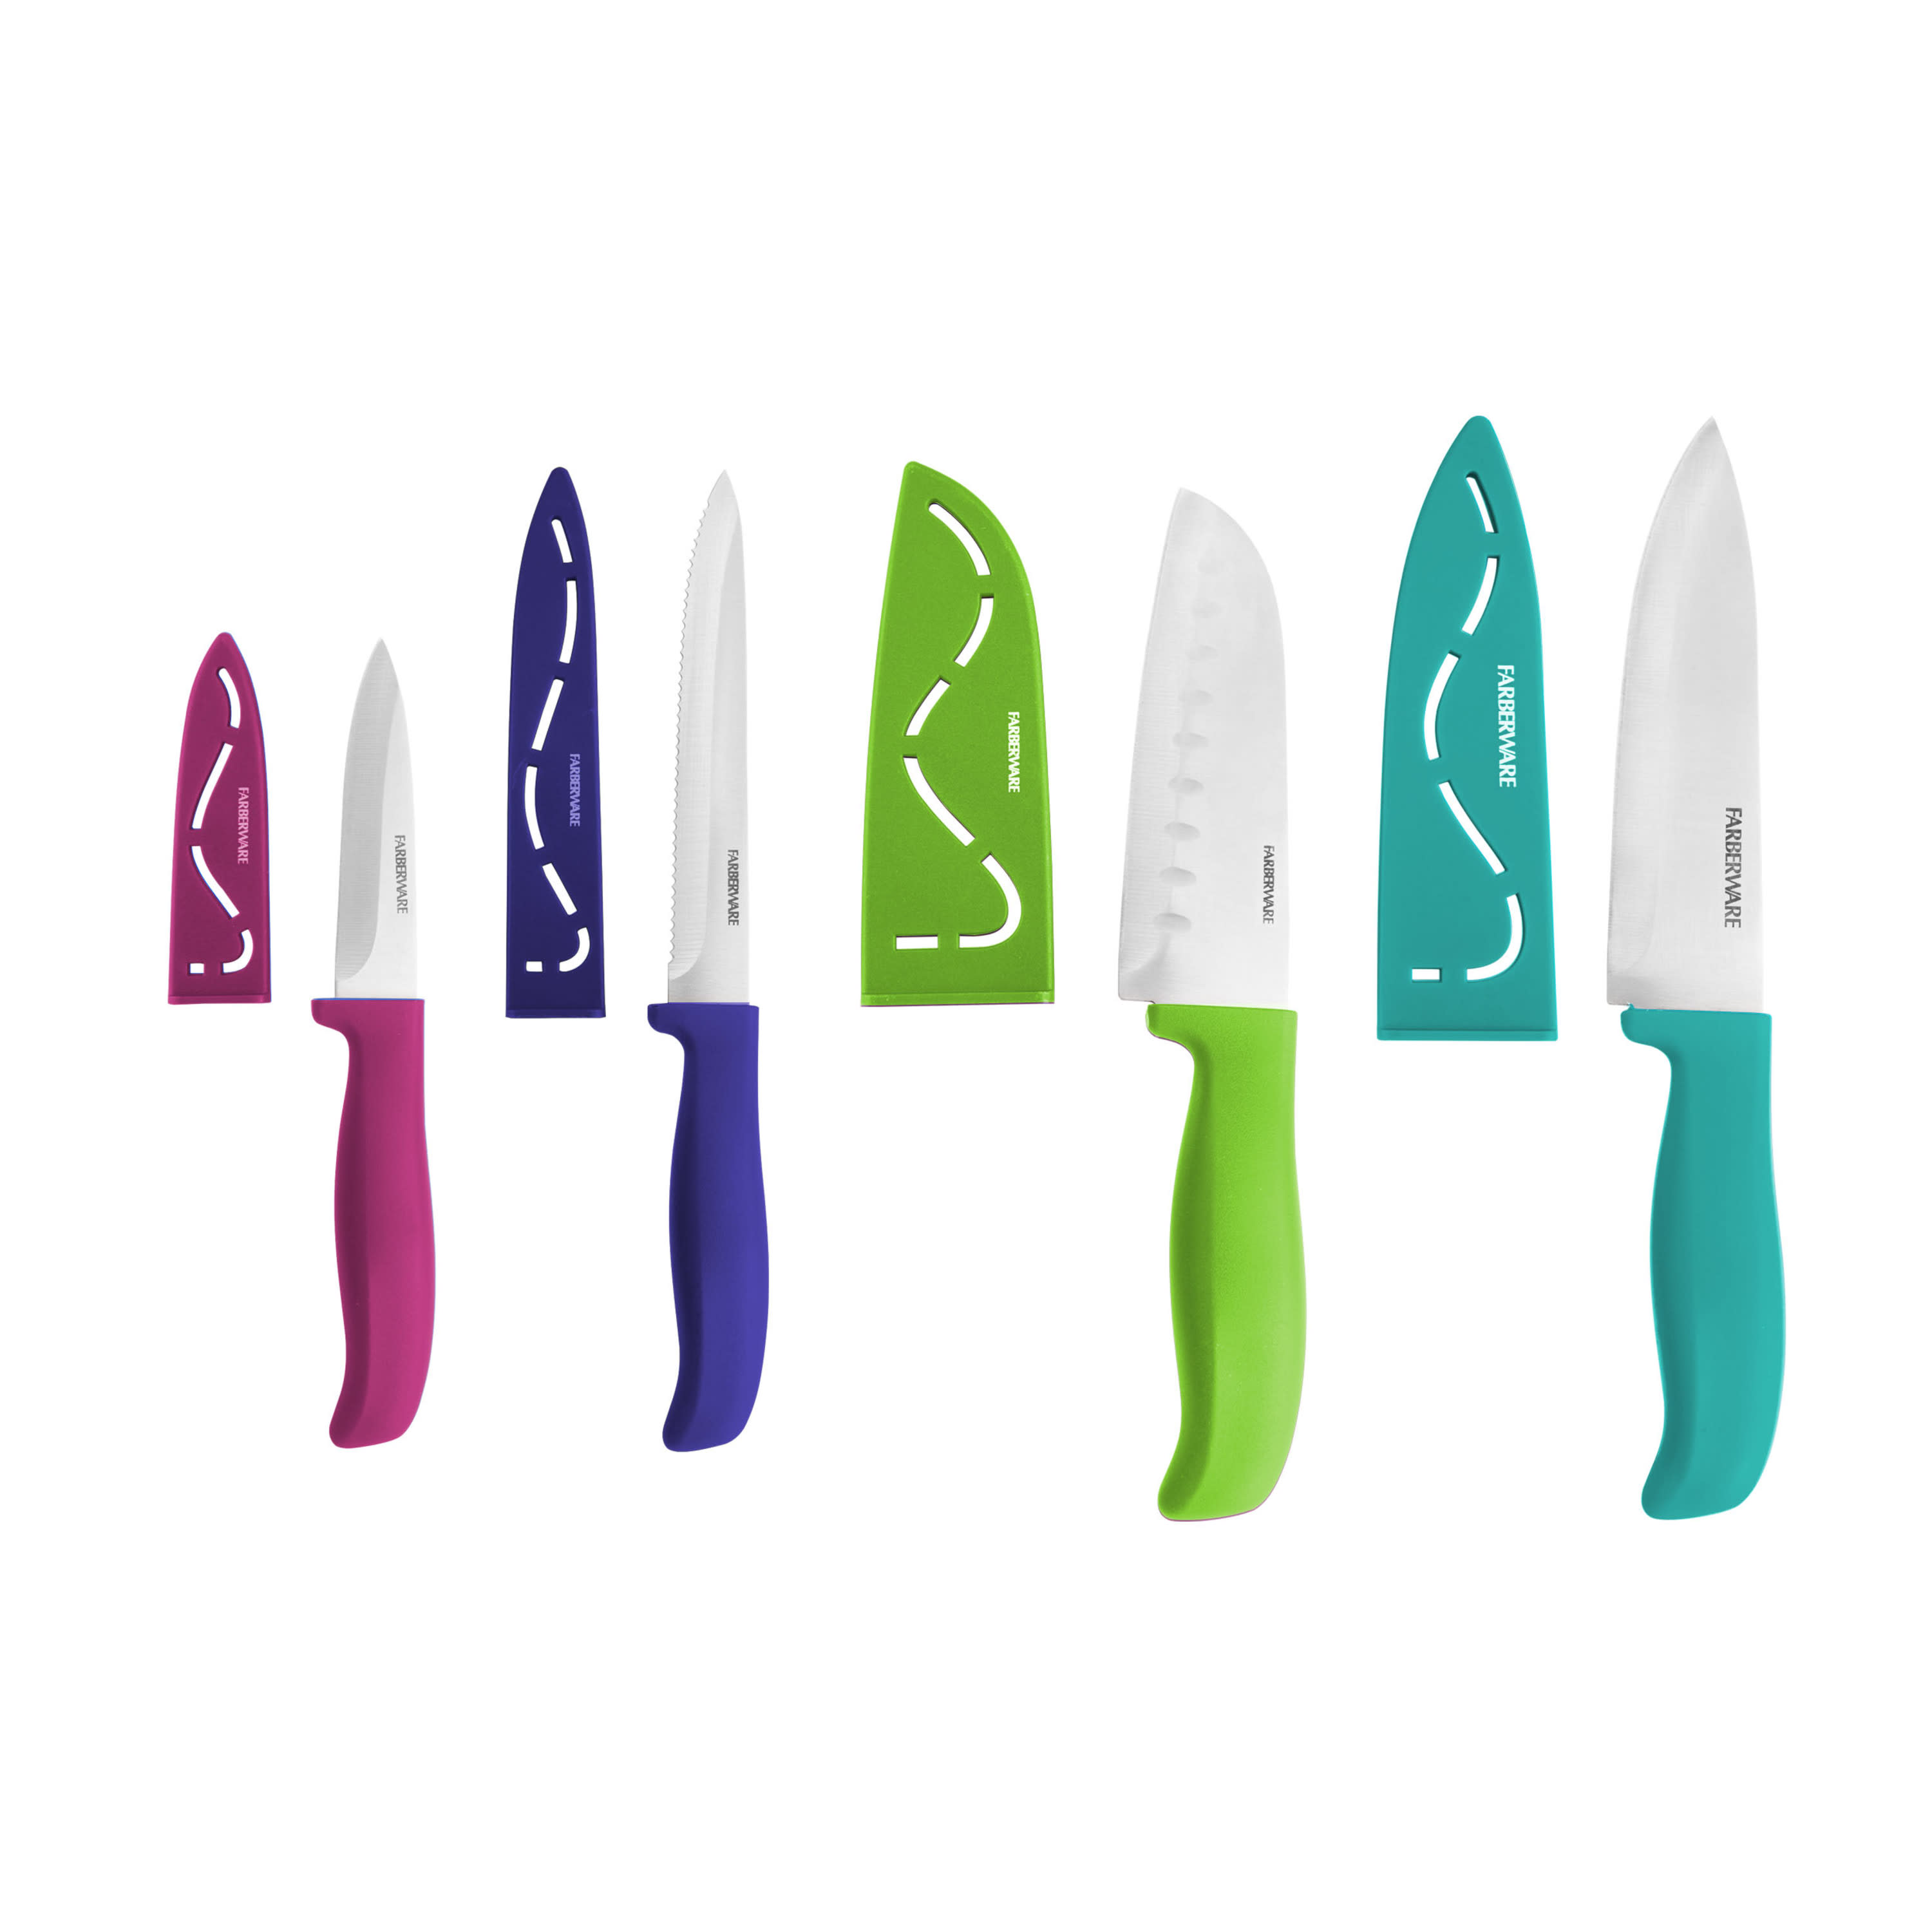 Farberware 4-piece Stamped Prep Knife Set Colored Plastic Handles - image 1 of 8